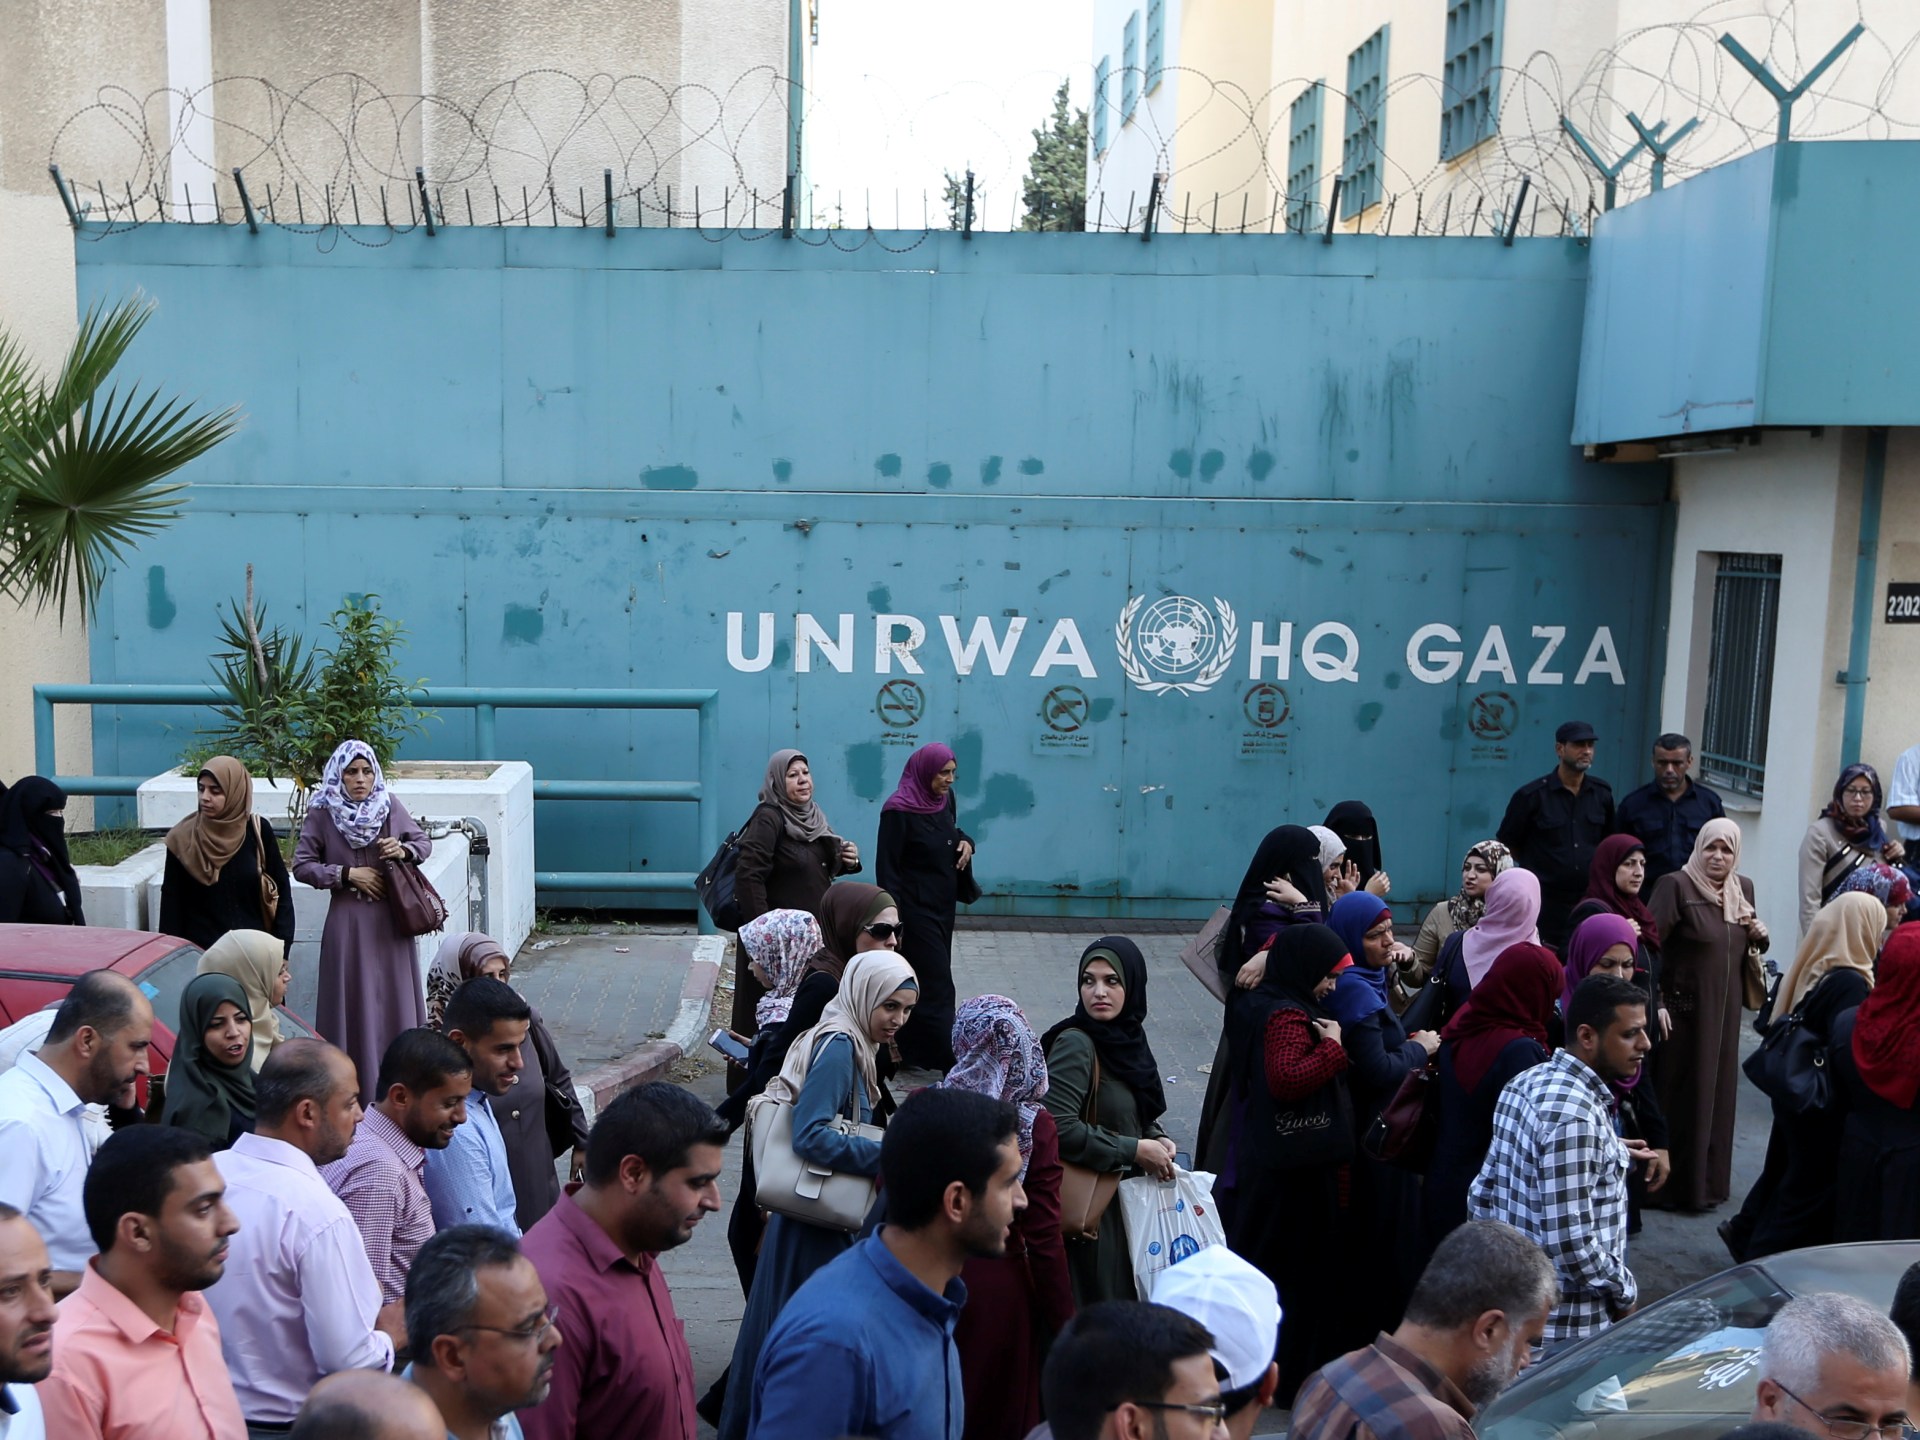 UNRWA probes employees over suspected involvement in October 7 attack | United Nations News